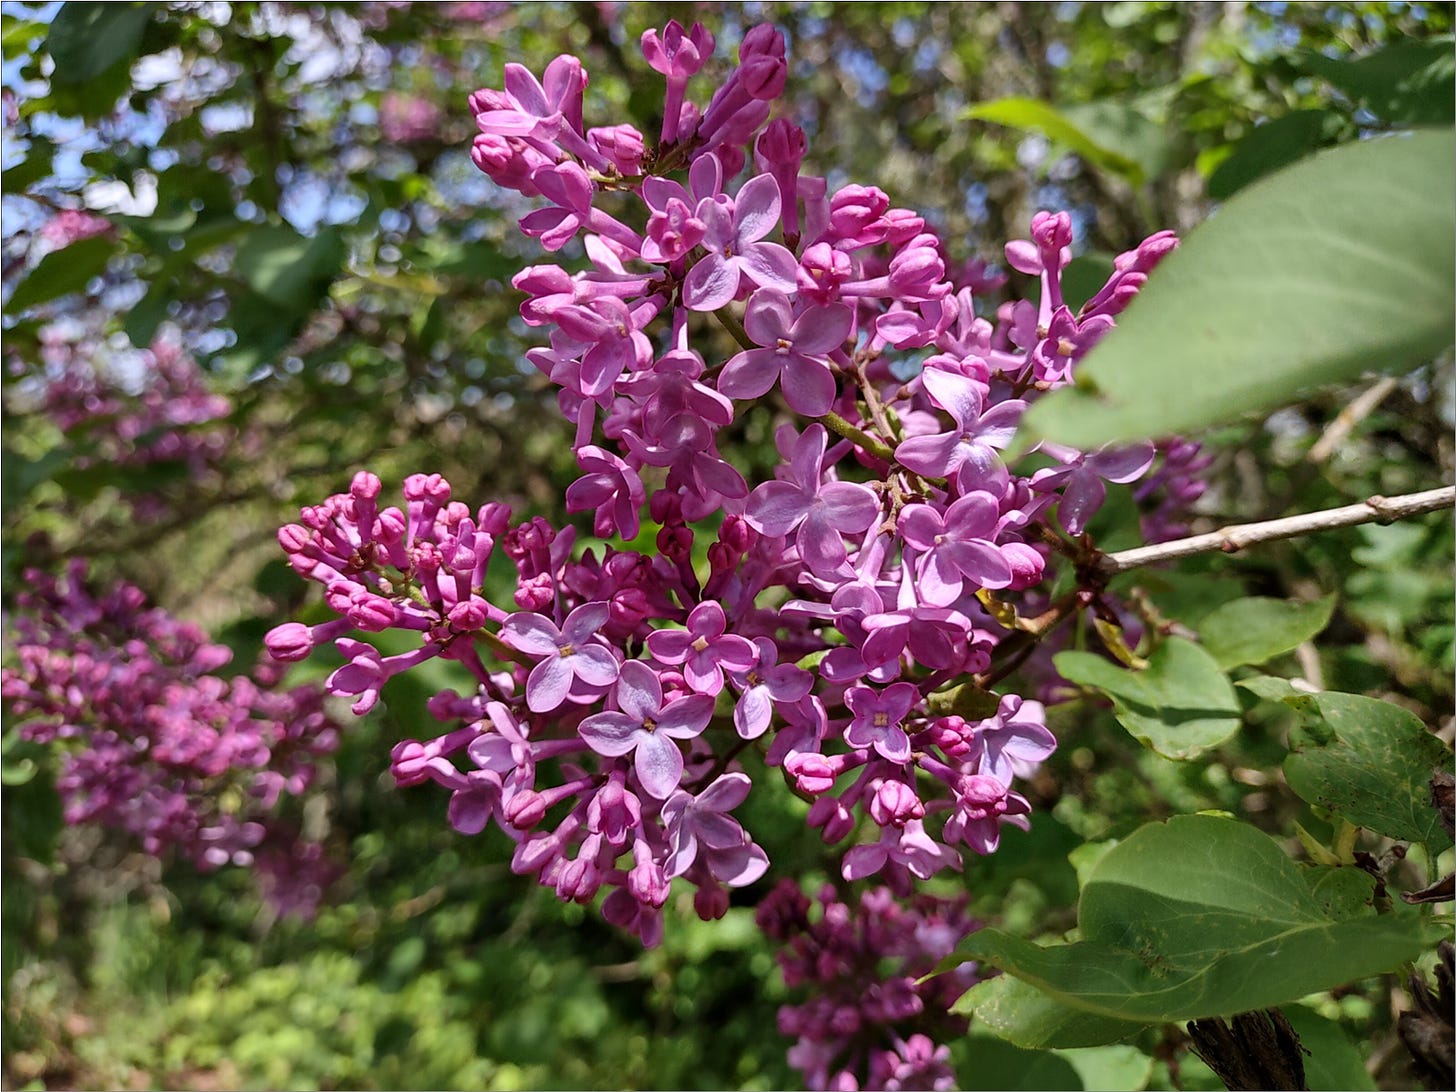 Spring lilacs bloom at the same time Pinot Noir buds open.